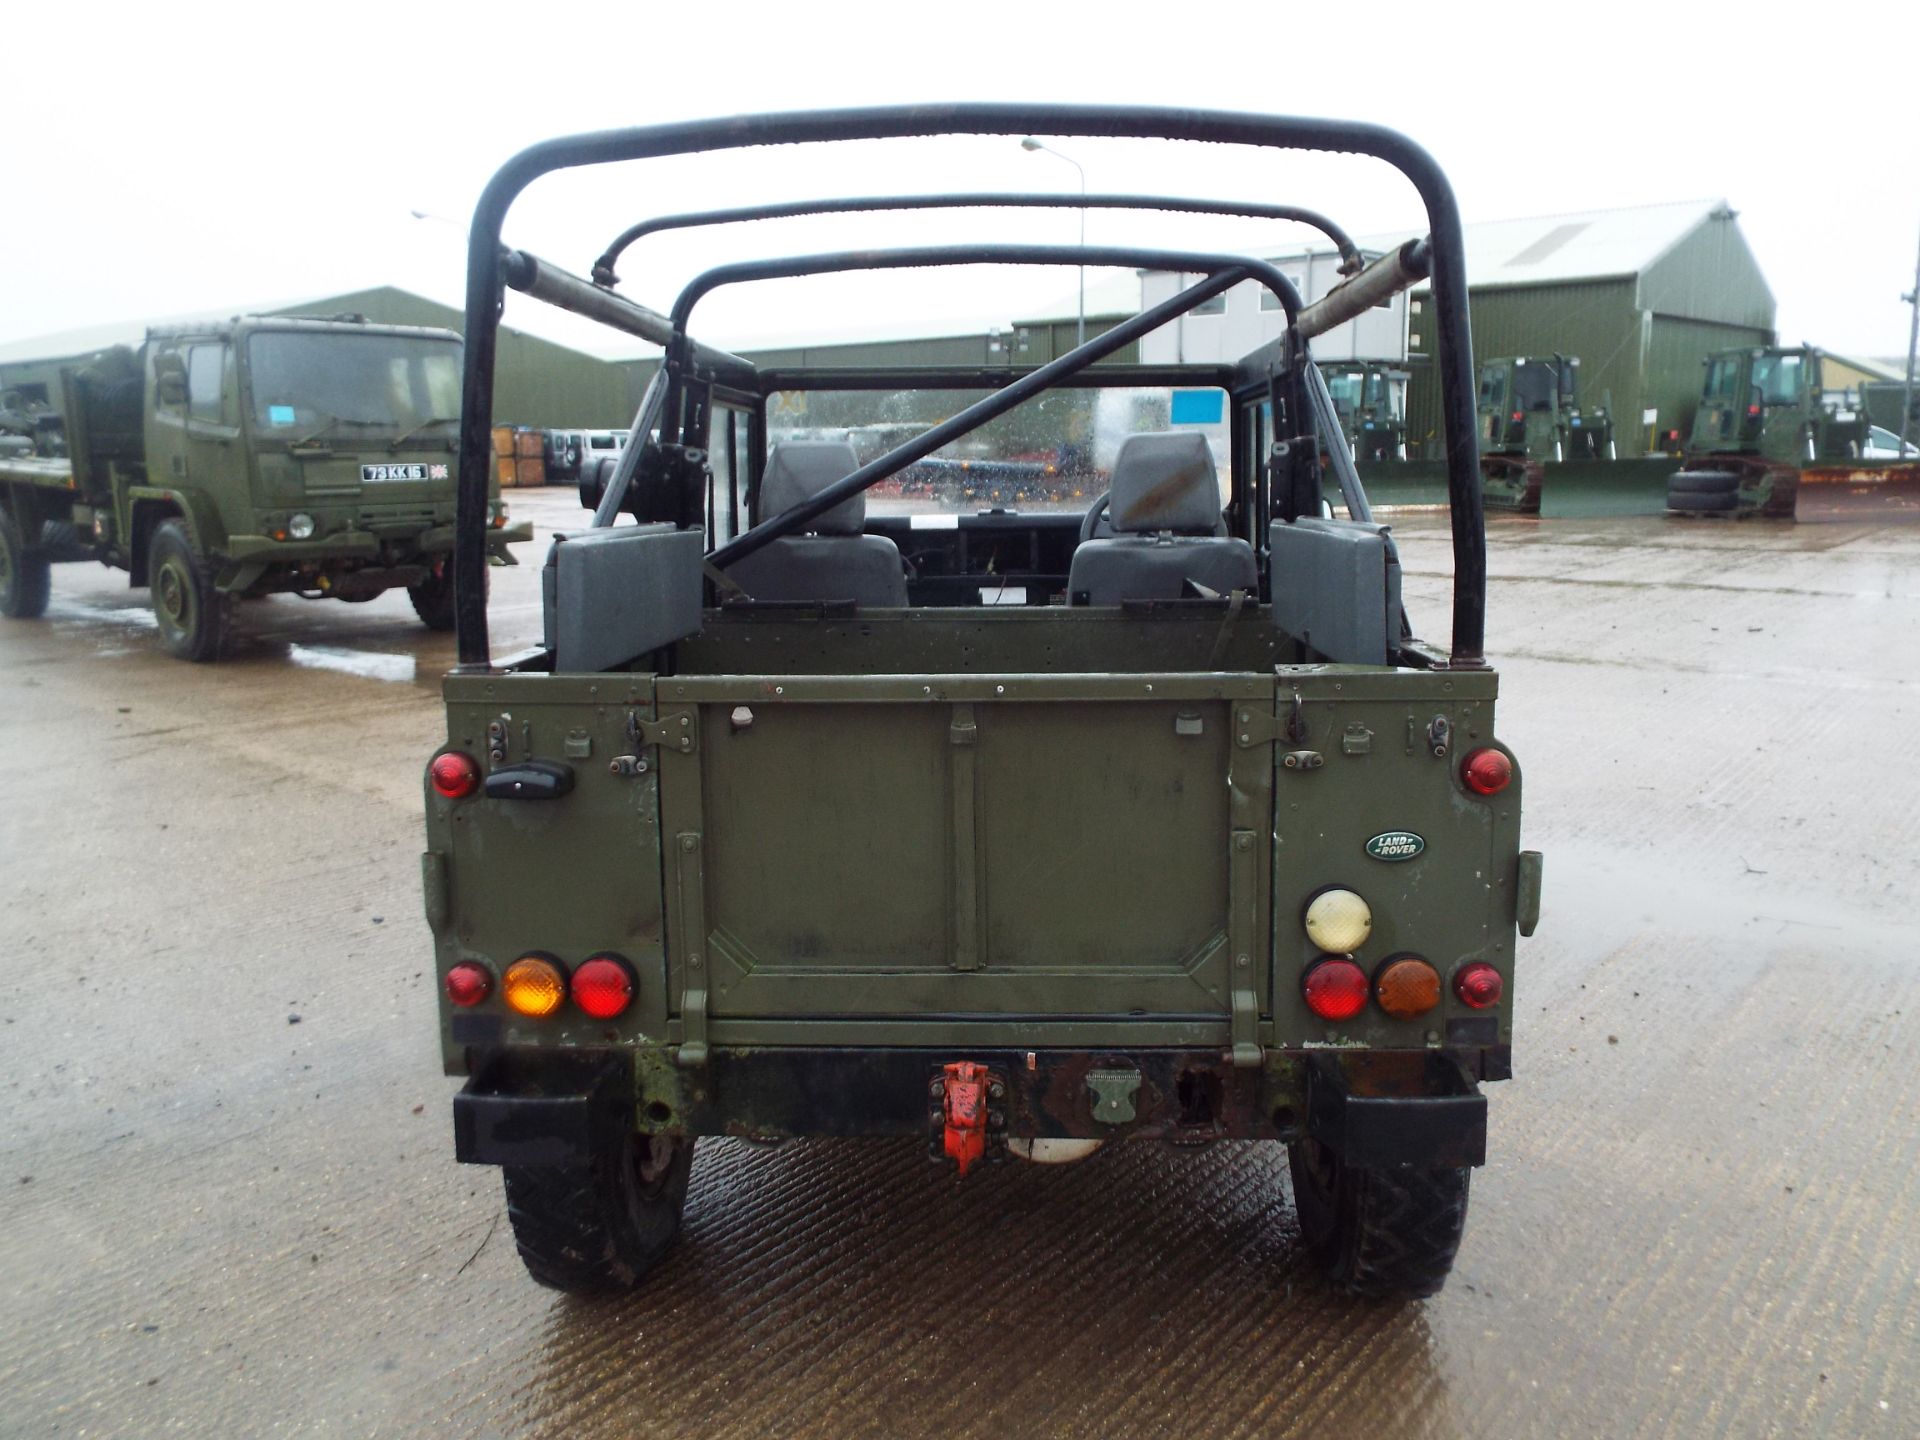 Military Specification Land Rover Wolf 90 Soft Top - Image 6 of 24